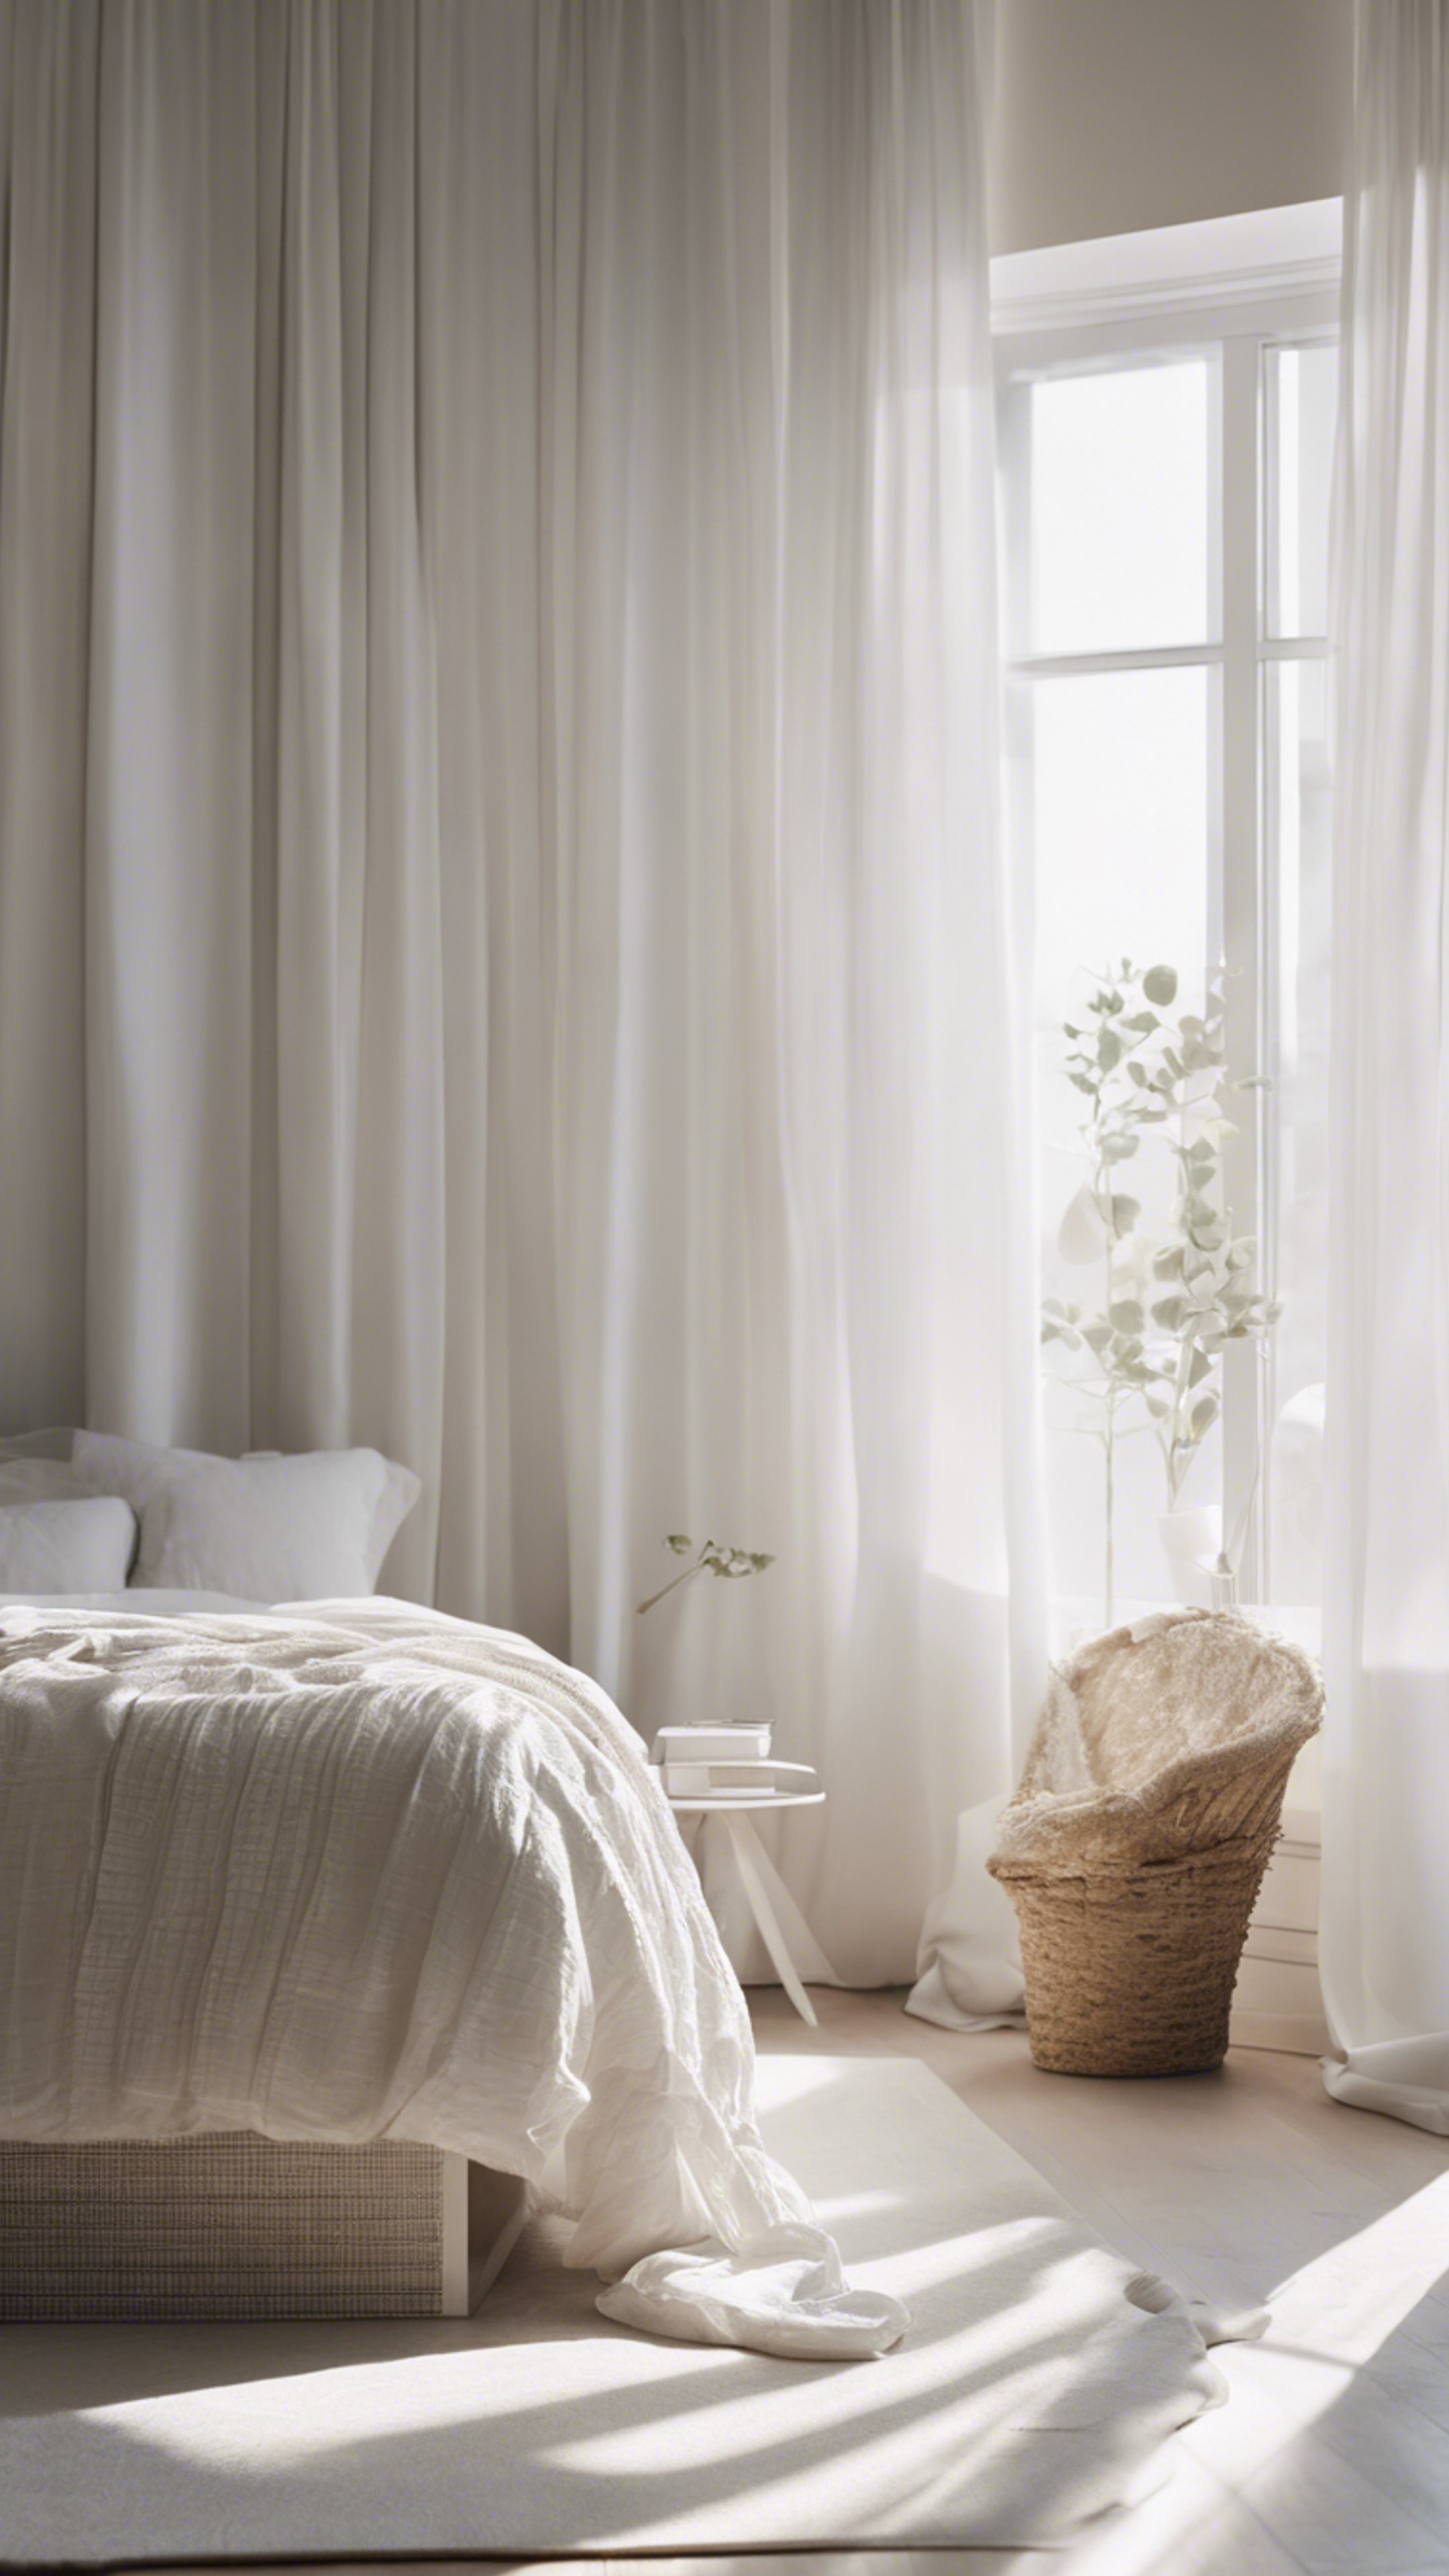 A serene white bedroom with a minimalist aesthetic, sunlight streaming through sheer curtains Tapet[e50a9fa27884450ea562]